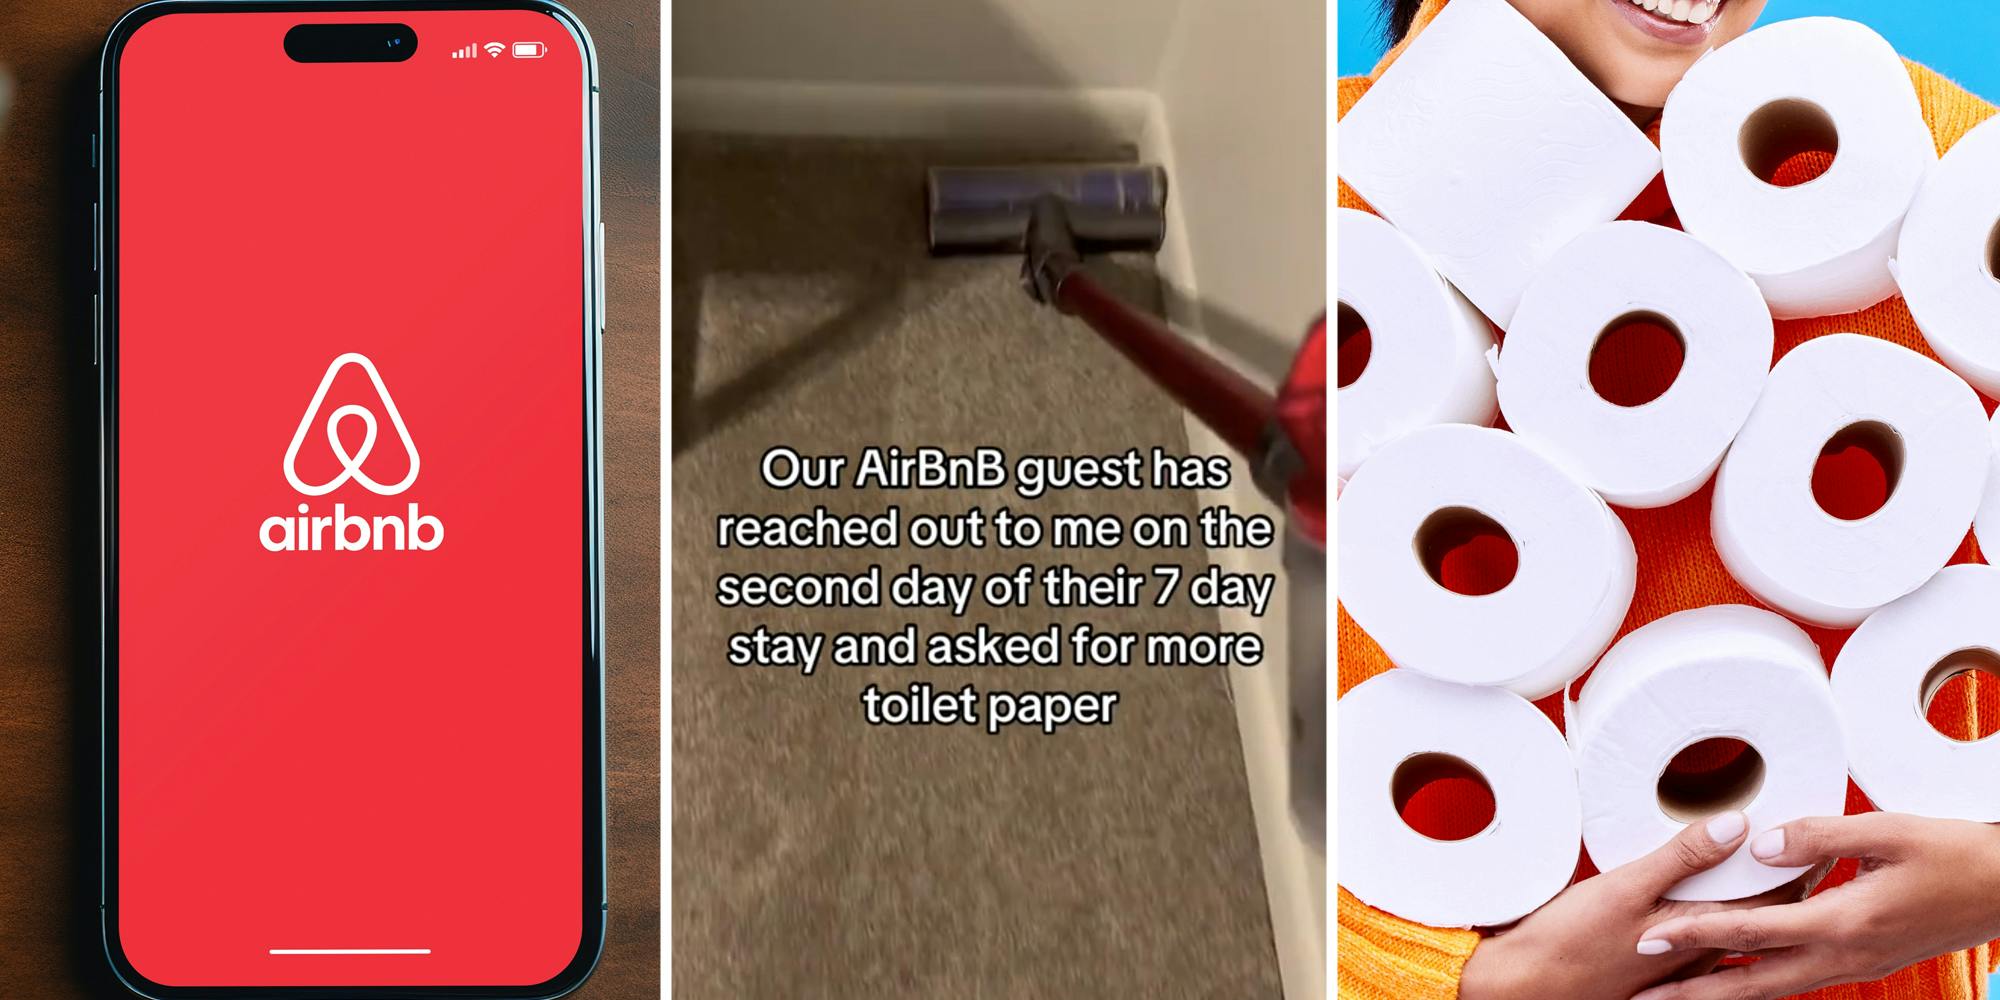 Airbnb app on phone(l), Someone vacuuming rug(c), Hands holding a bunch of toilet paper(r)